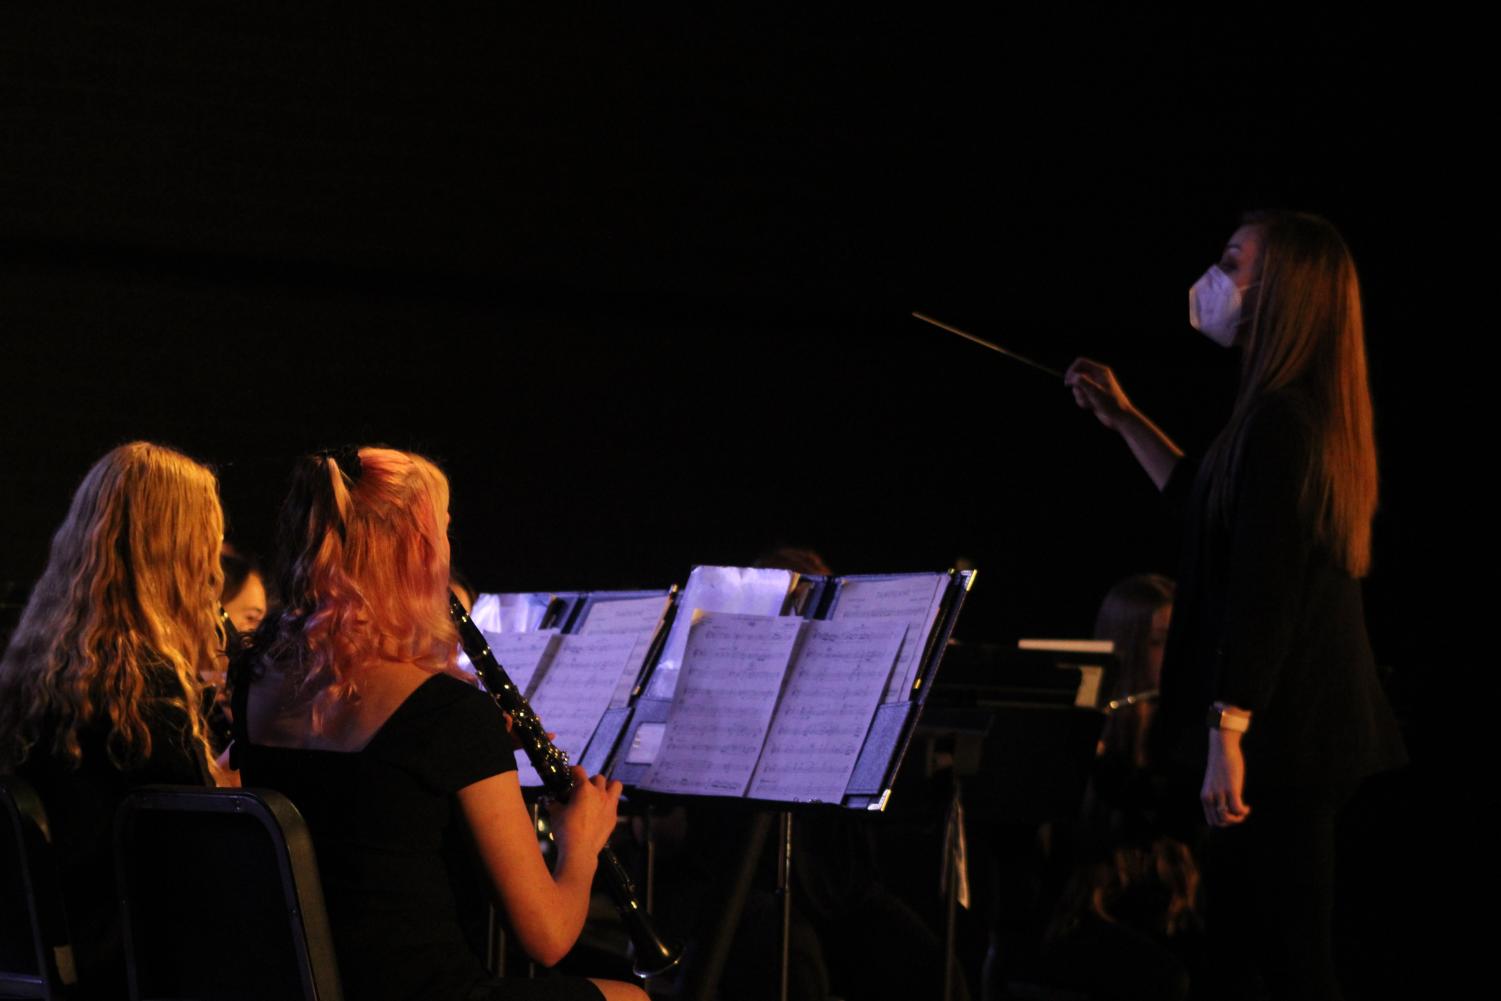 Symphonic+and+Wind+Ensemble+band+concert+with+Madrigals+%28Photos+by+Laurisa+Rooney%29